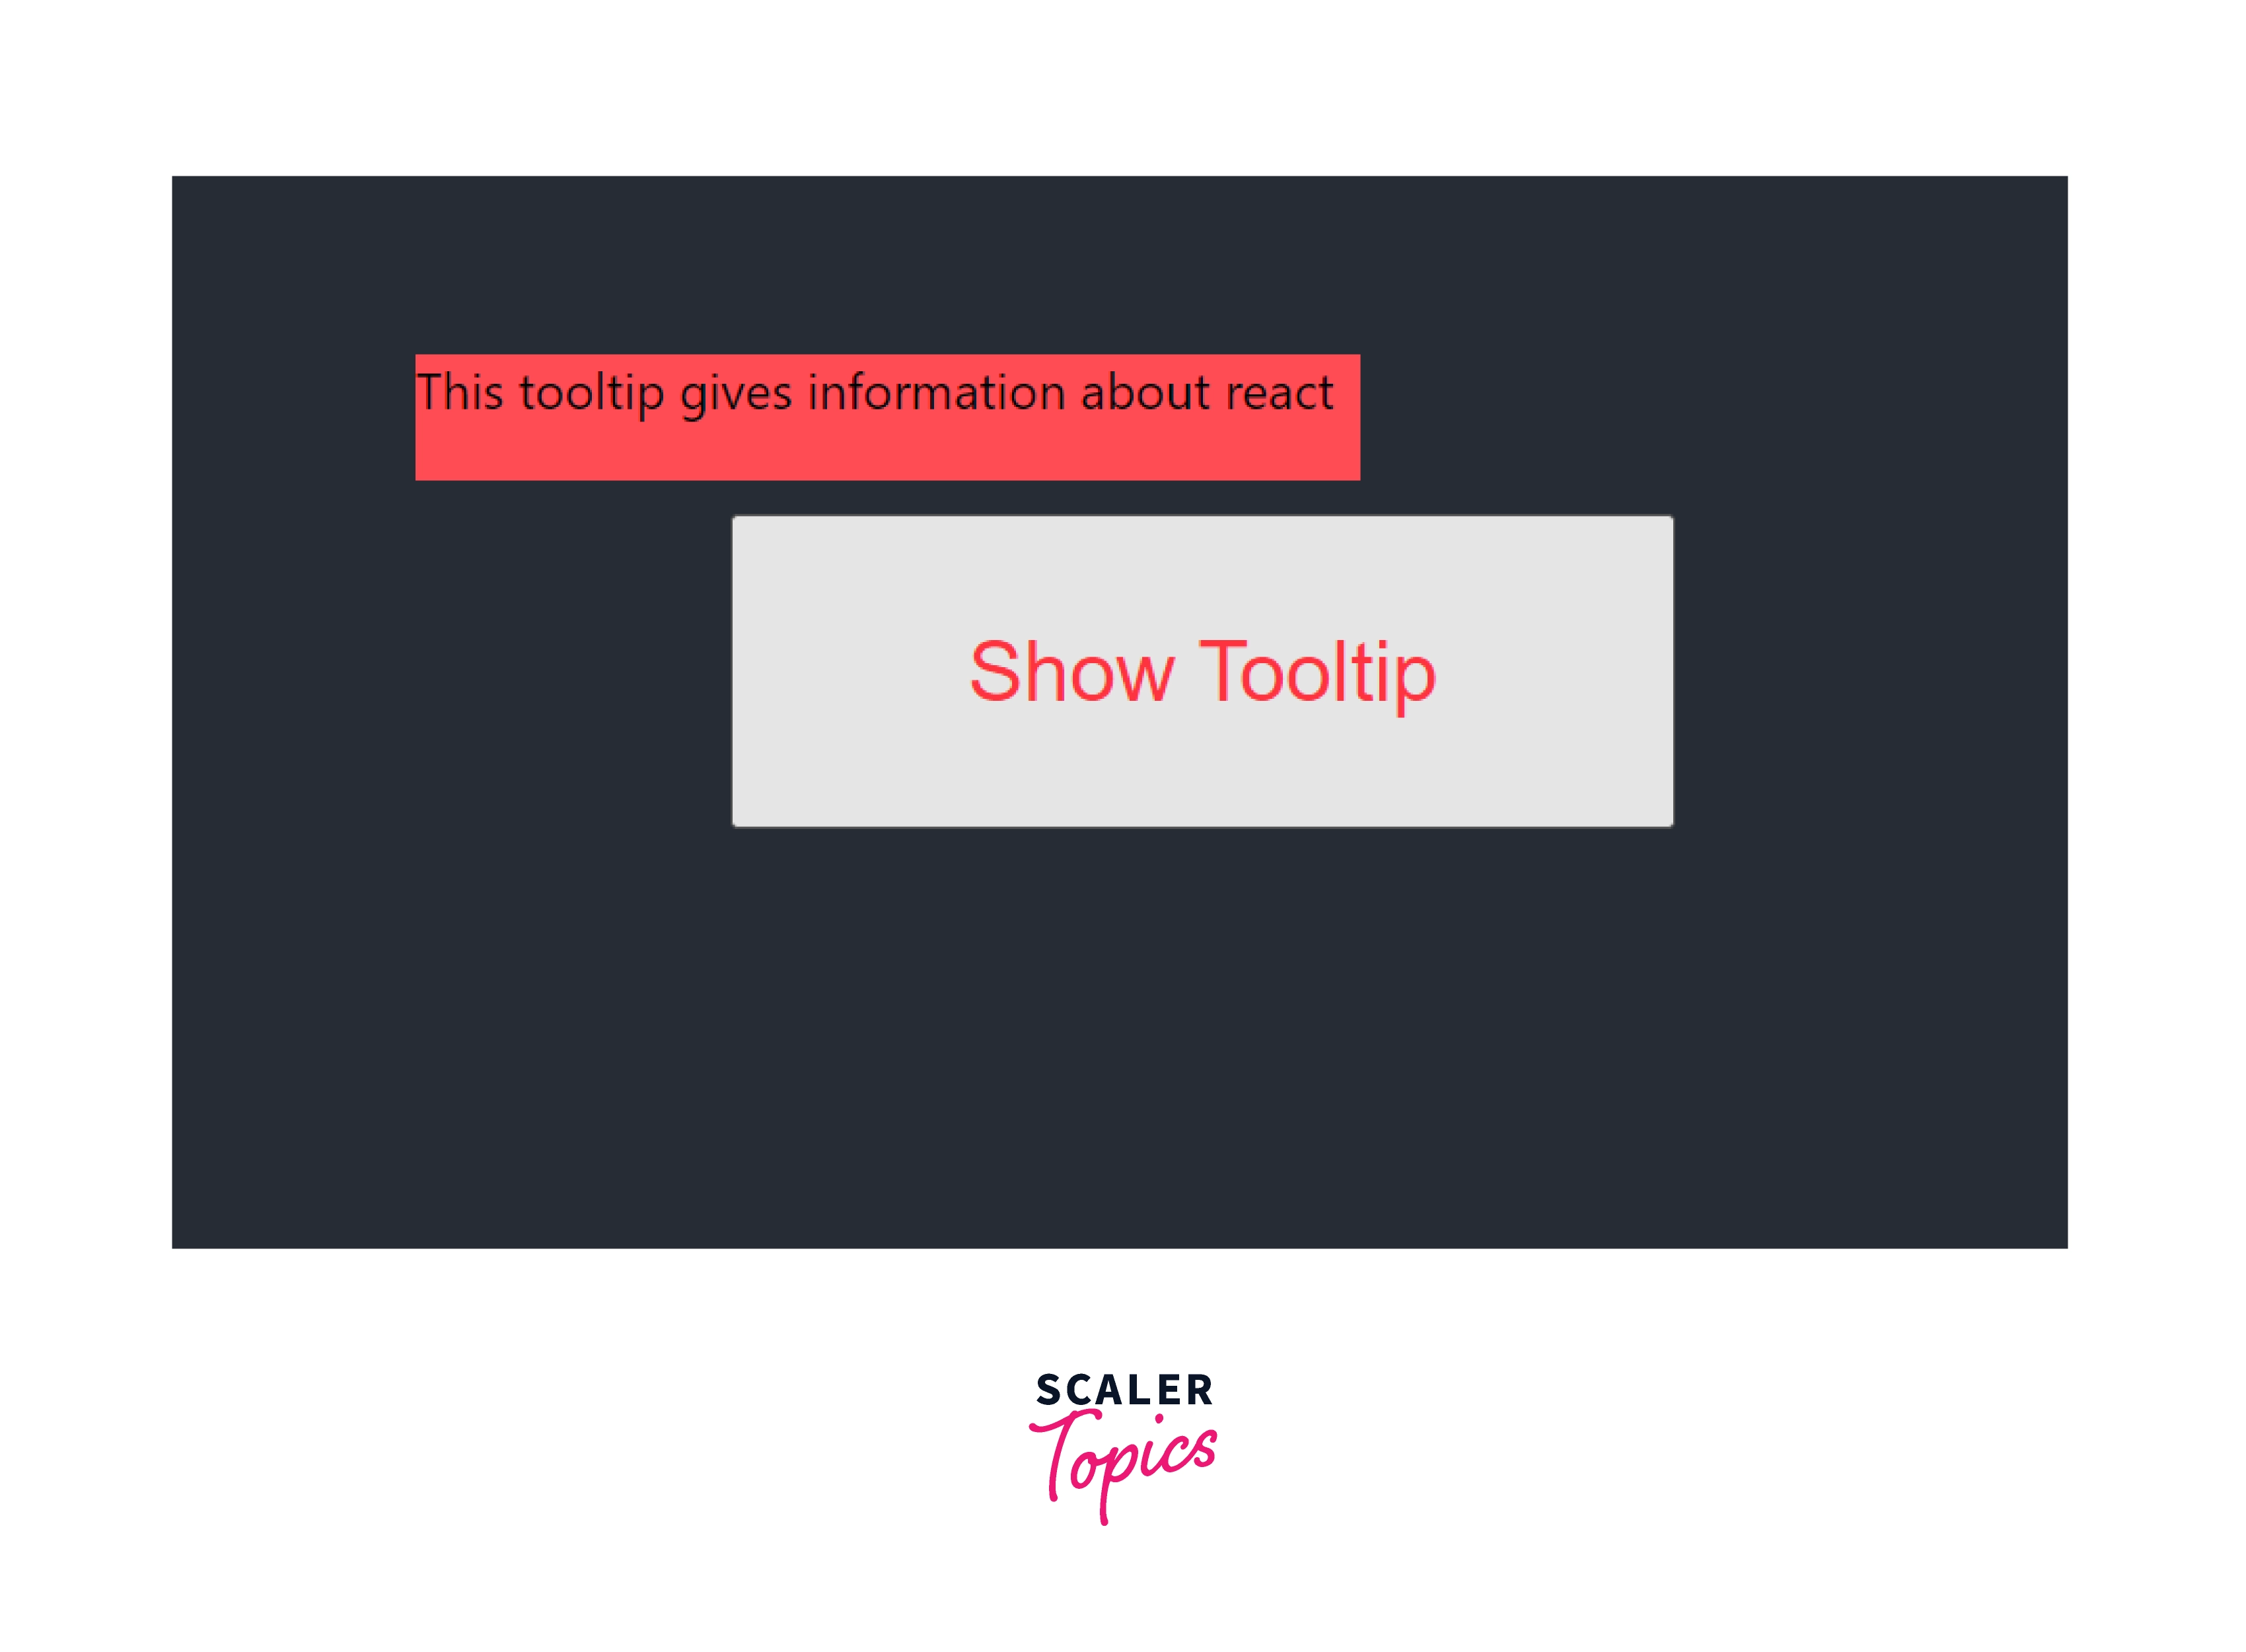 tooltip created using the react portal